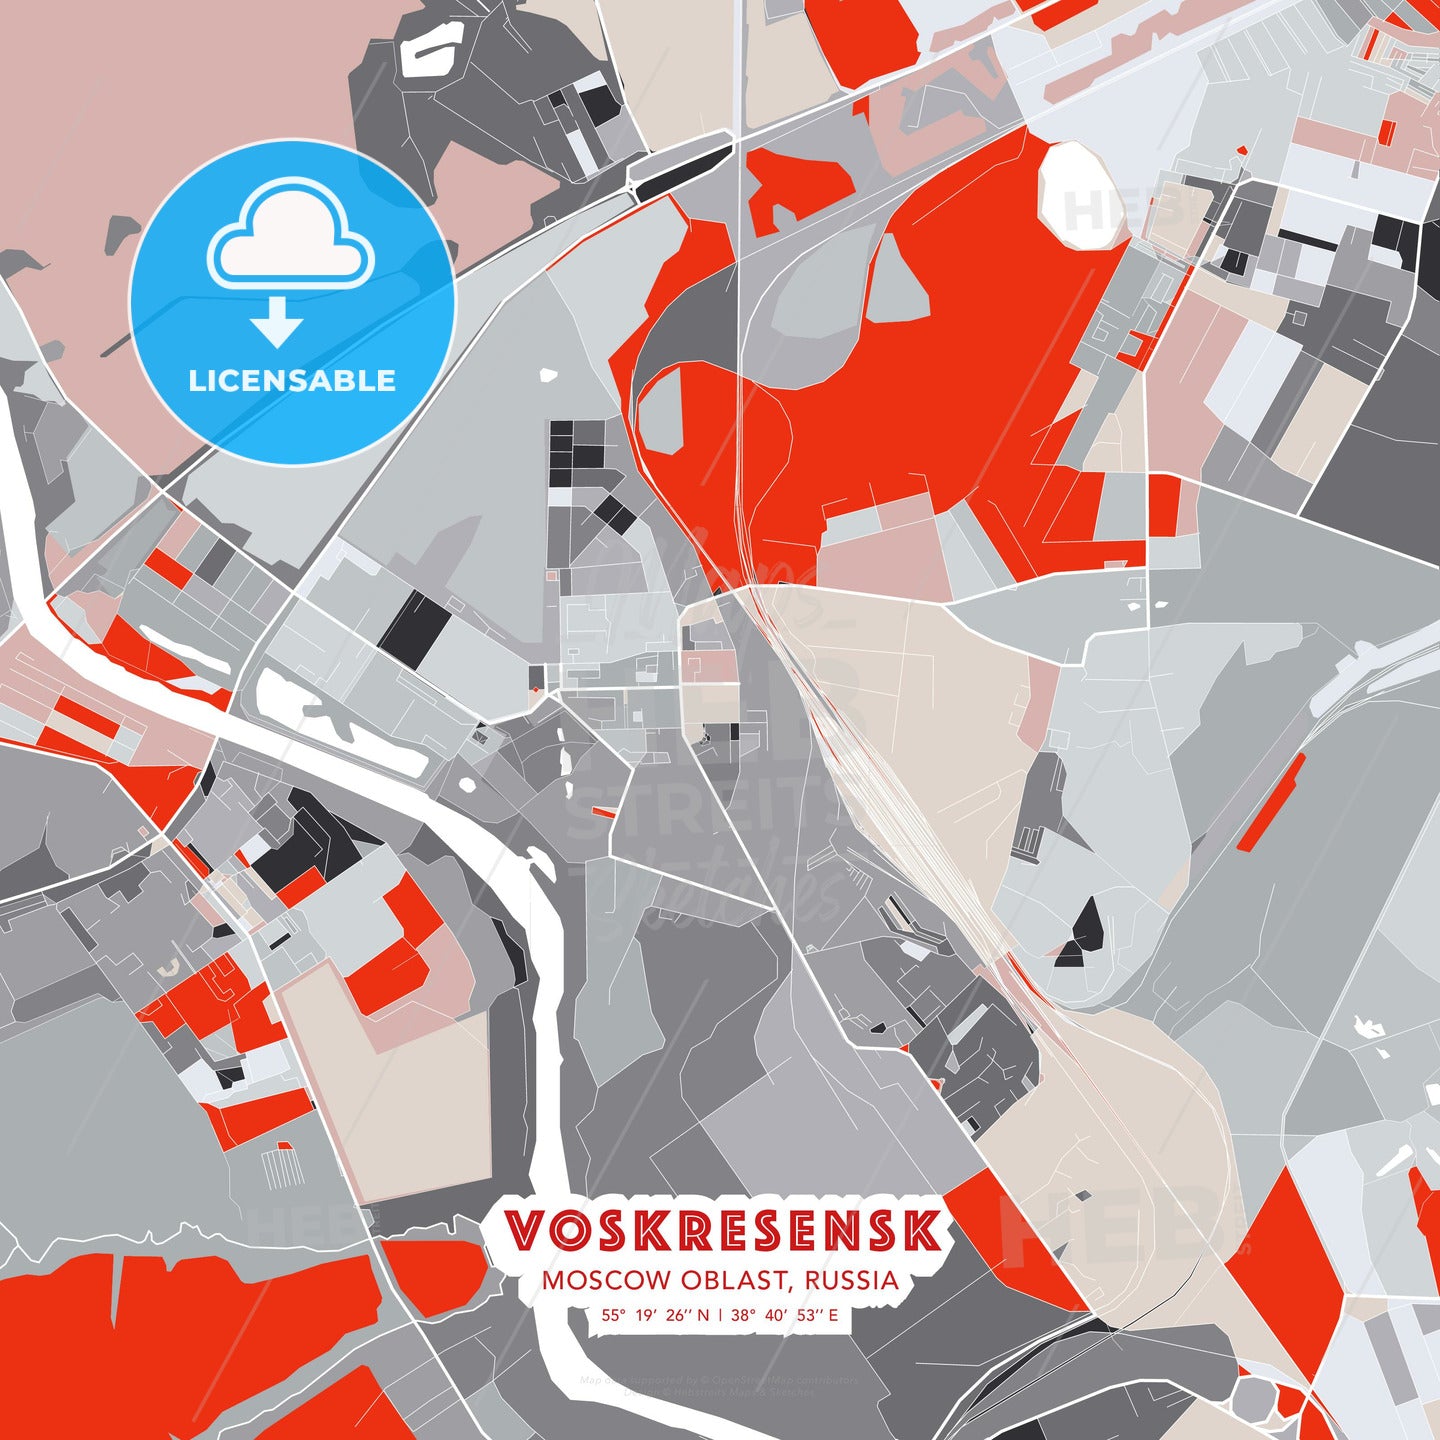 Voskresensk, Moscow Oblast, Russia, modern map - HEBSTREITS Sketches